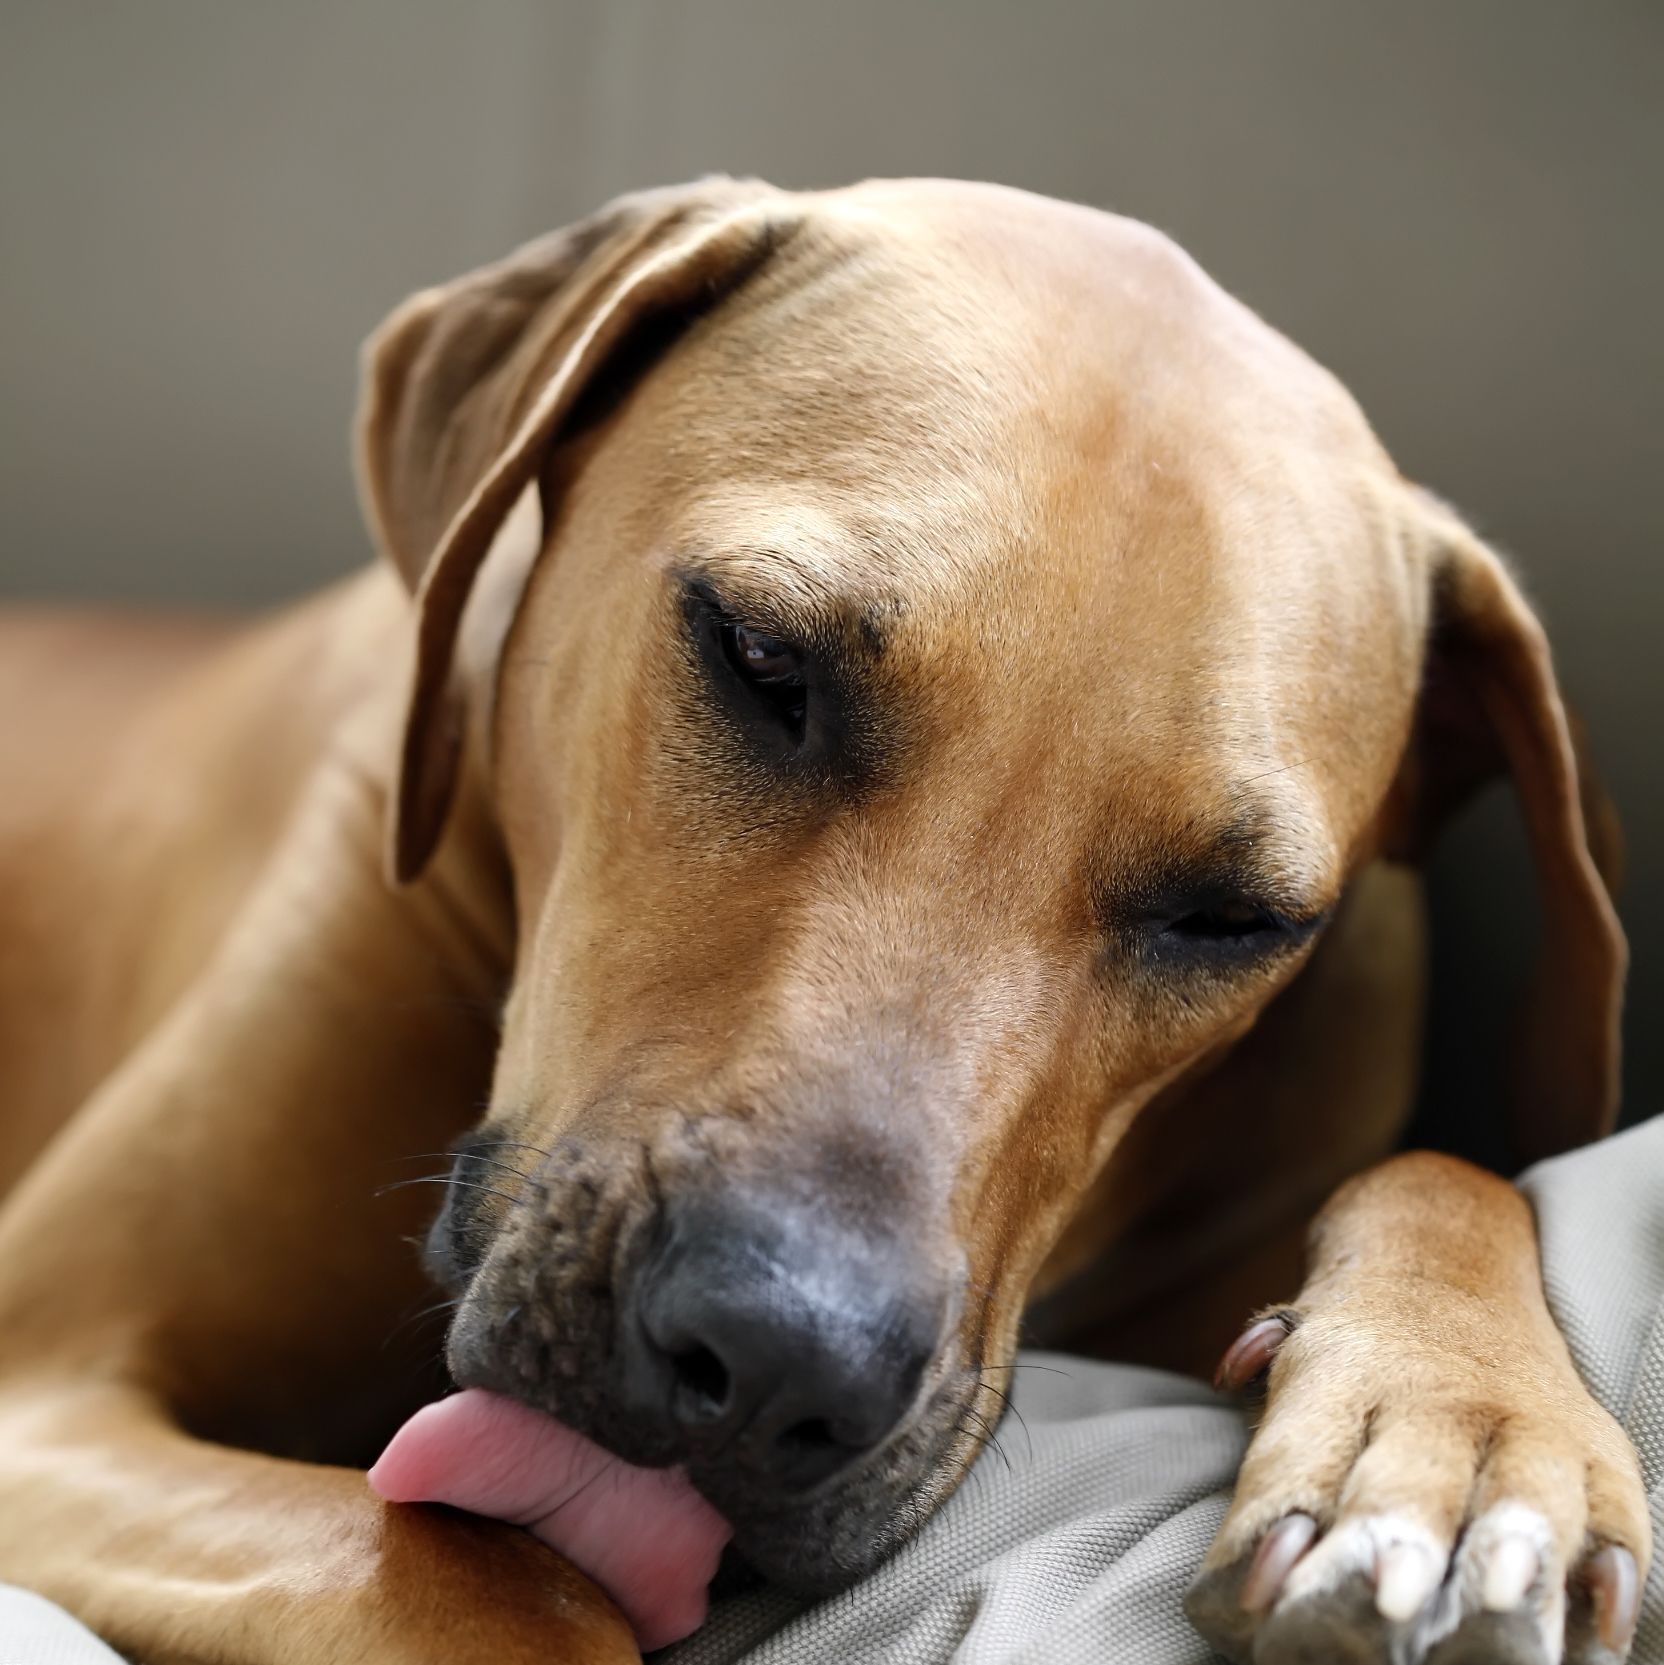 https://hips.hearstapps.com/hmg-prod/images/why-do-dogs-lick-their-paws-1623665178.jpg?crop=1.00xw:0.667xh;0,0.0704xh&resize=2048:*